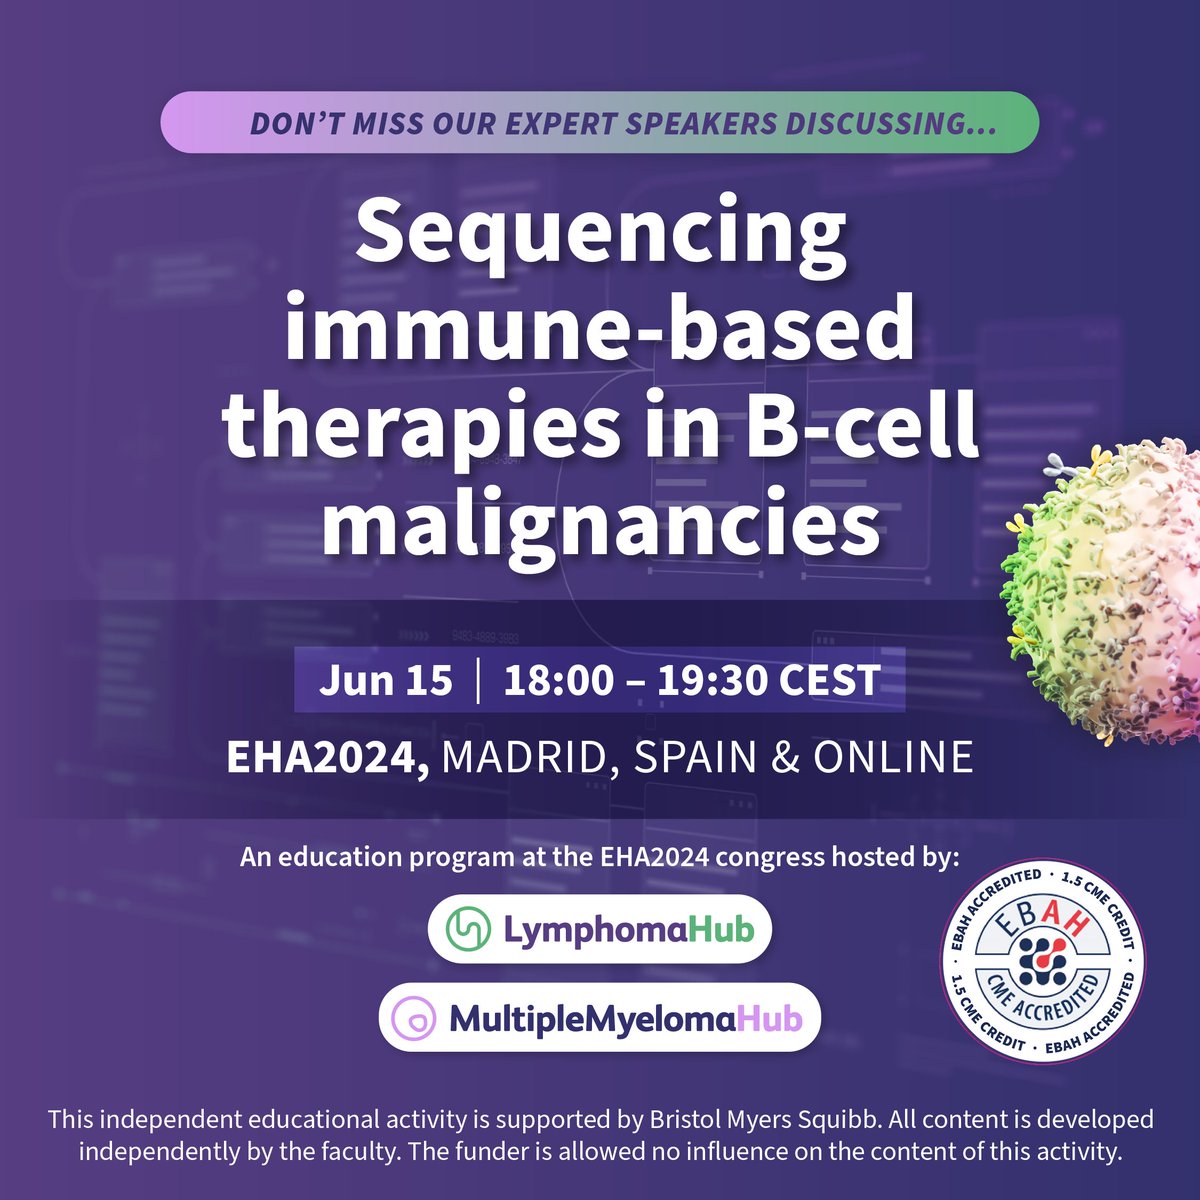 Join the #Lymphoma Hub (@lymphomahub) and #MultipleMyeloma Hub symposium at @EHA_Hematology: Sequencing immune-based therapies in B-cell malignancies. 📍 Madrid, Spain & Online 📅 June 15; 18:00–19:30 CEST #EHA2024 #lymsm #mmsm